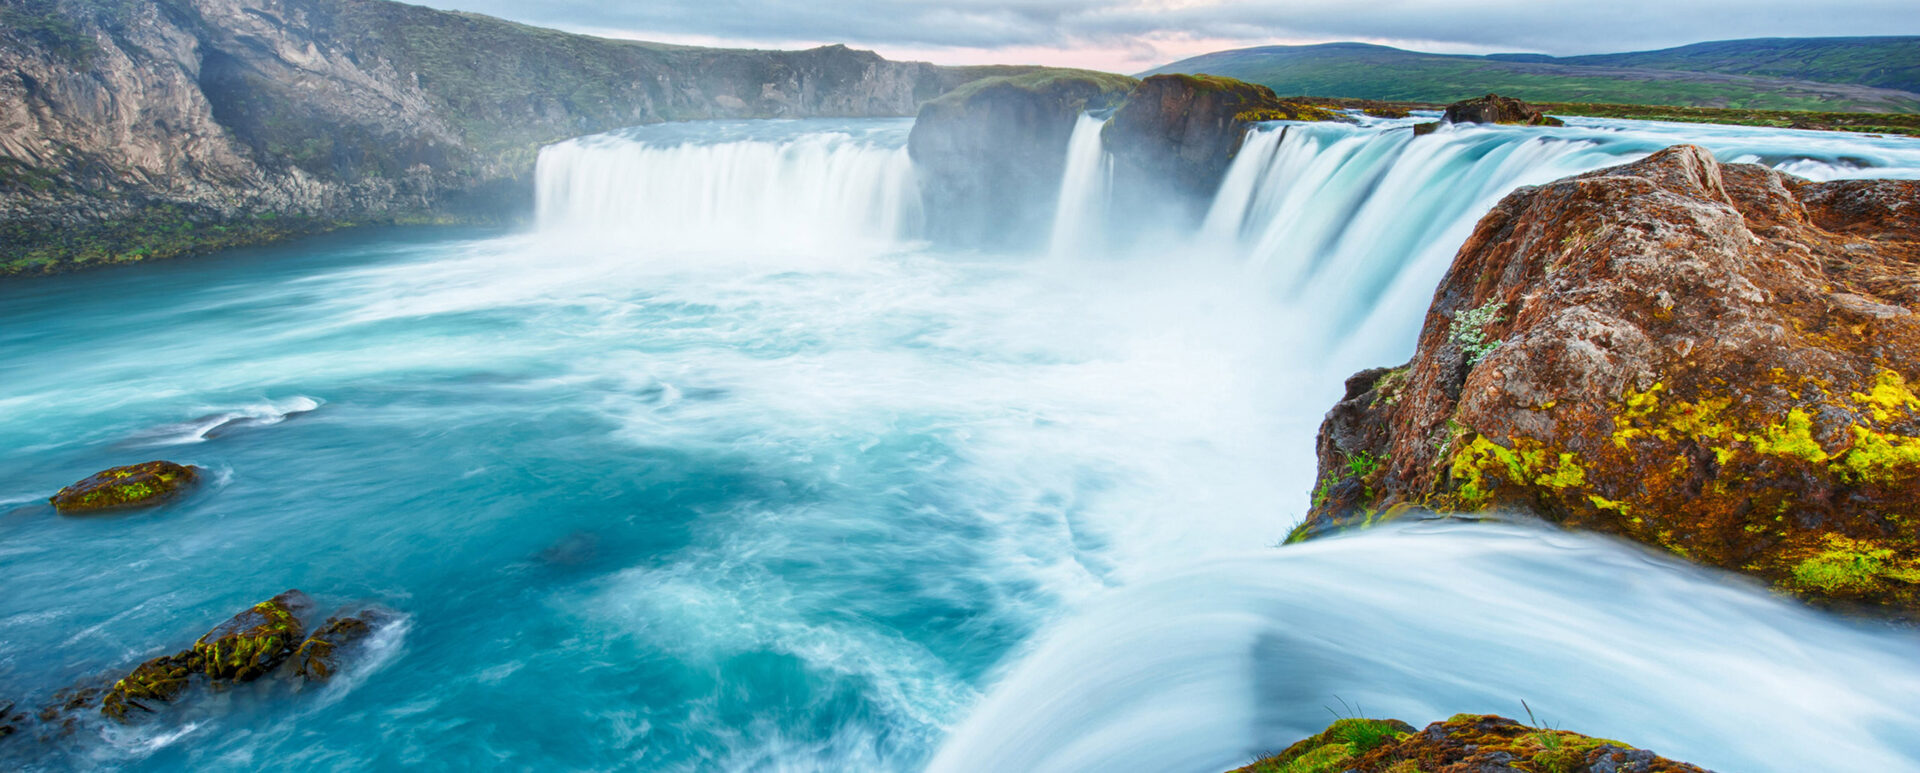 Iceland, Godafoss waterfall, How best to spend a week in Iceland